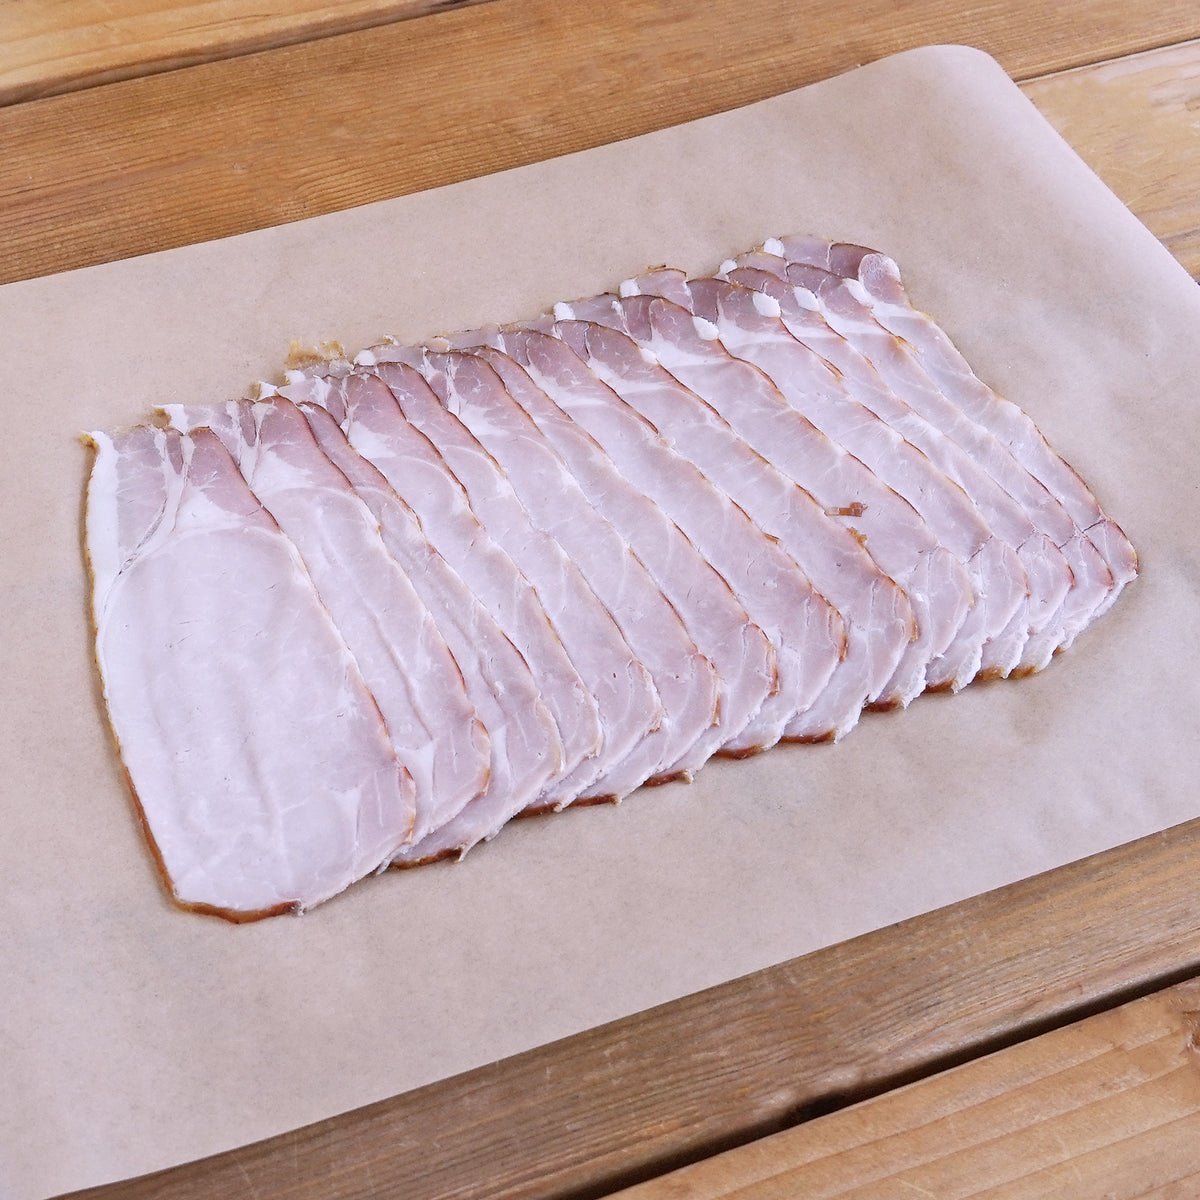 (Limited Sale 20% OFF) All-Natural Lightly Seasoned Smoked Free-Range Canadian Style Pork Bacon Slices (200g) - Horizon Farms